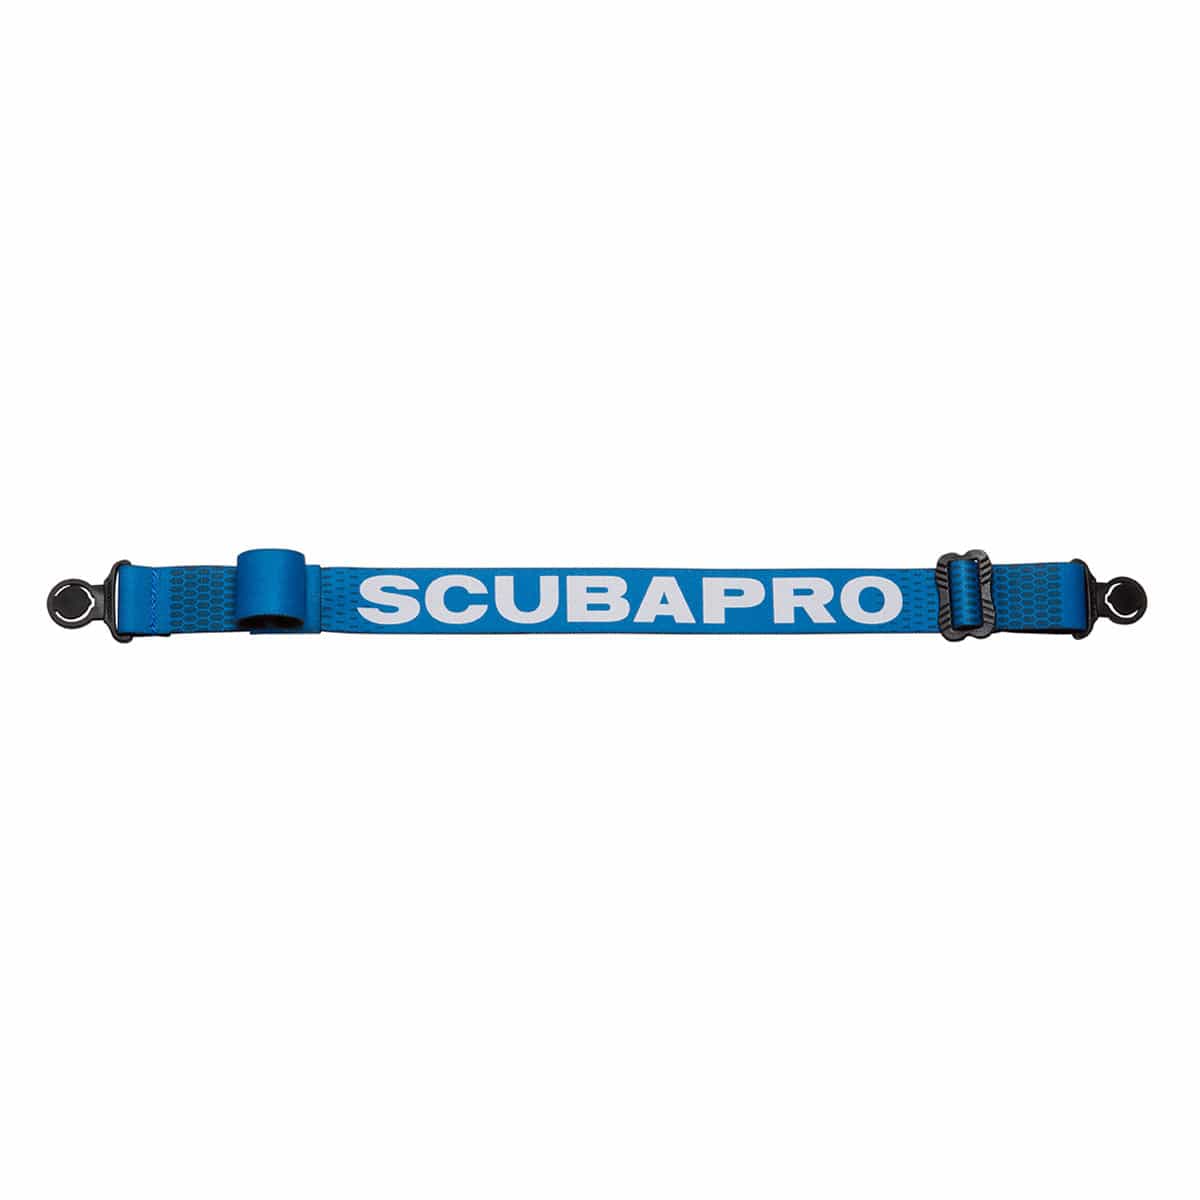 Scubapro Comfort Strap - Turquoise - 24.730.020-NED - 28